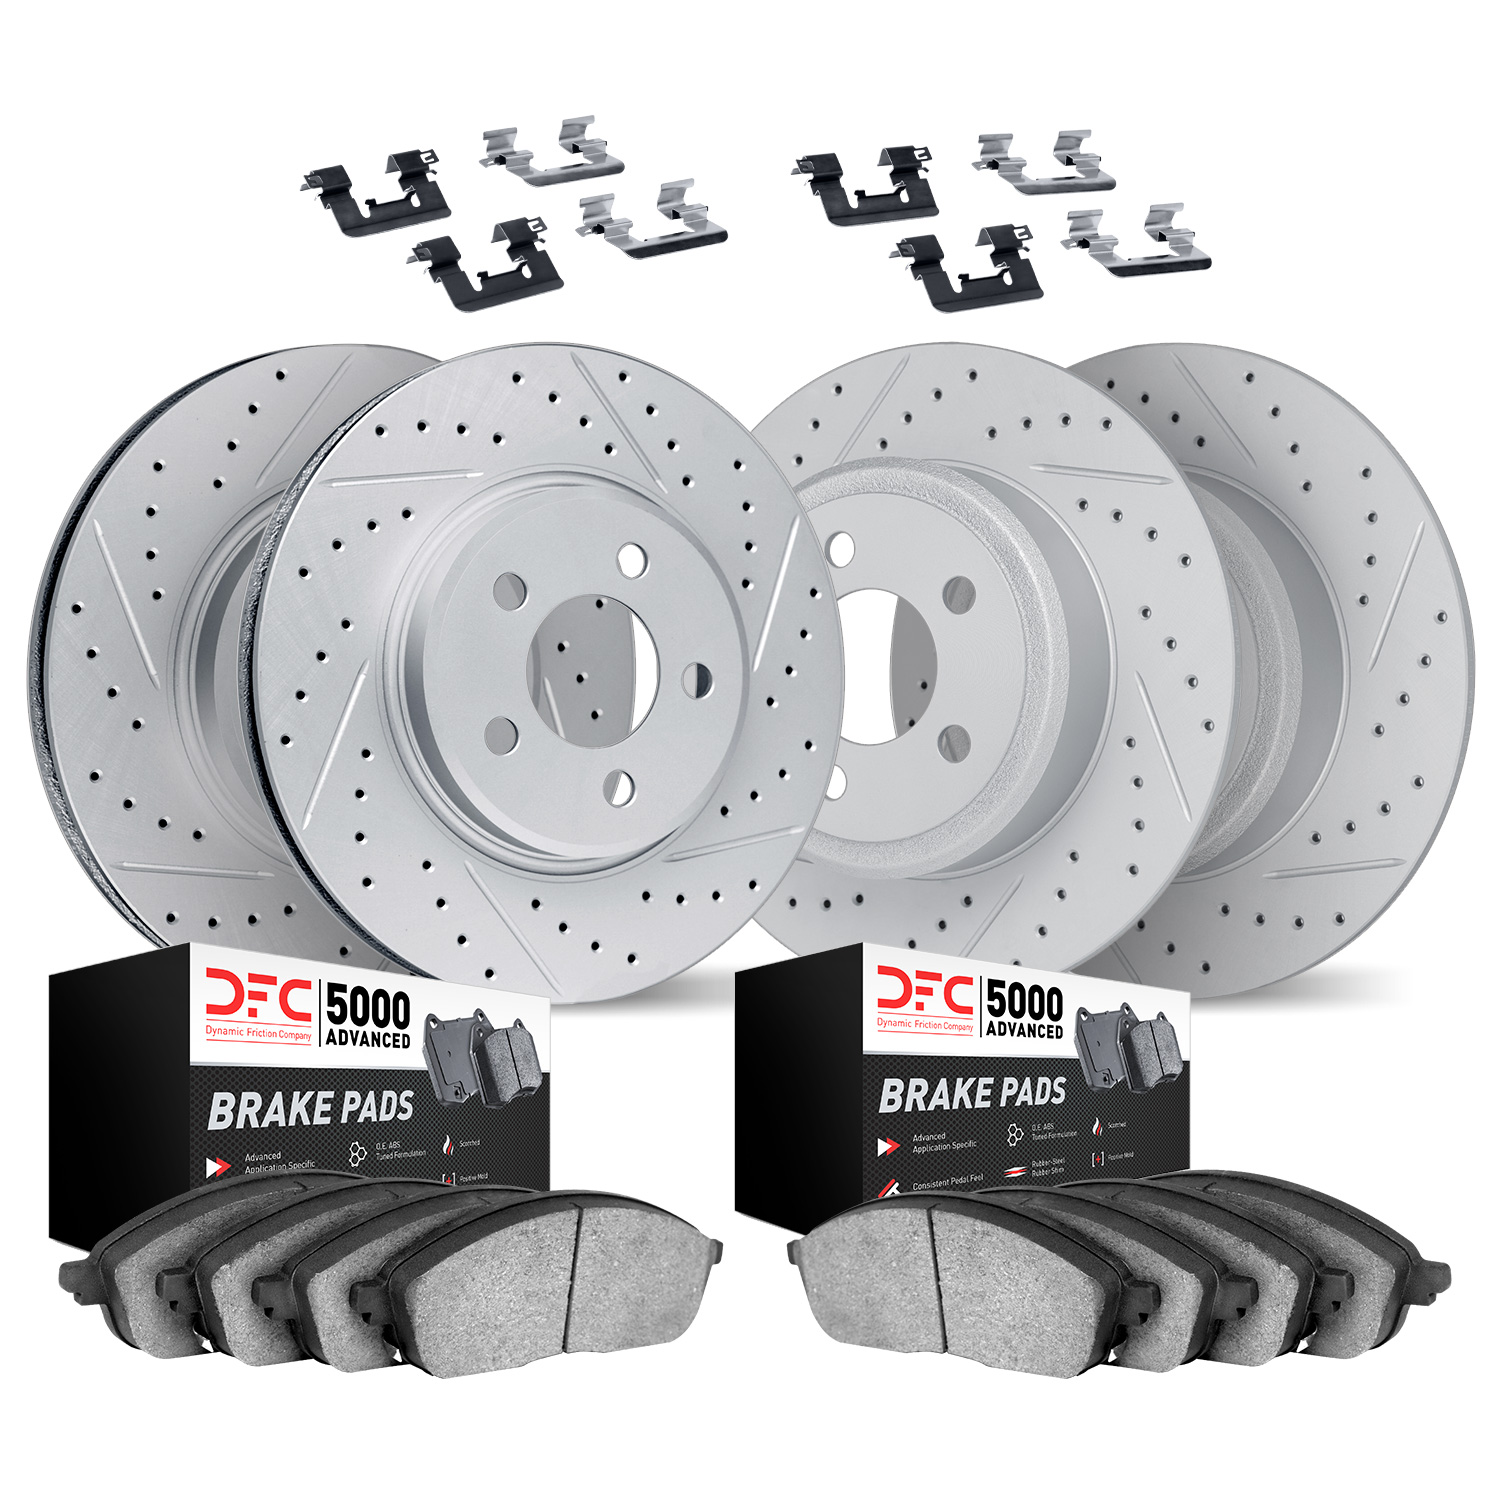 2514-58004 Geoperformance Drilled/Slotted Rotors w/5000 Advanced Brake Pads Kit & Hardware, 2017-2020 Acura/Honda, Position: Fro